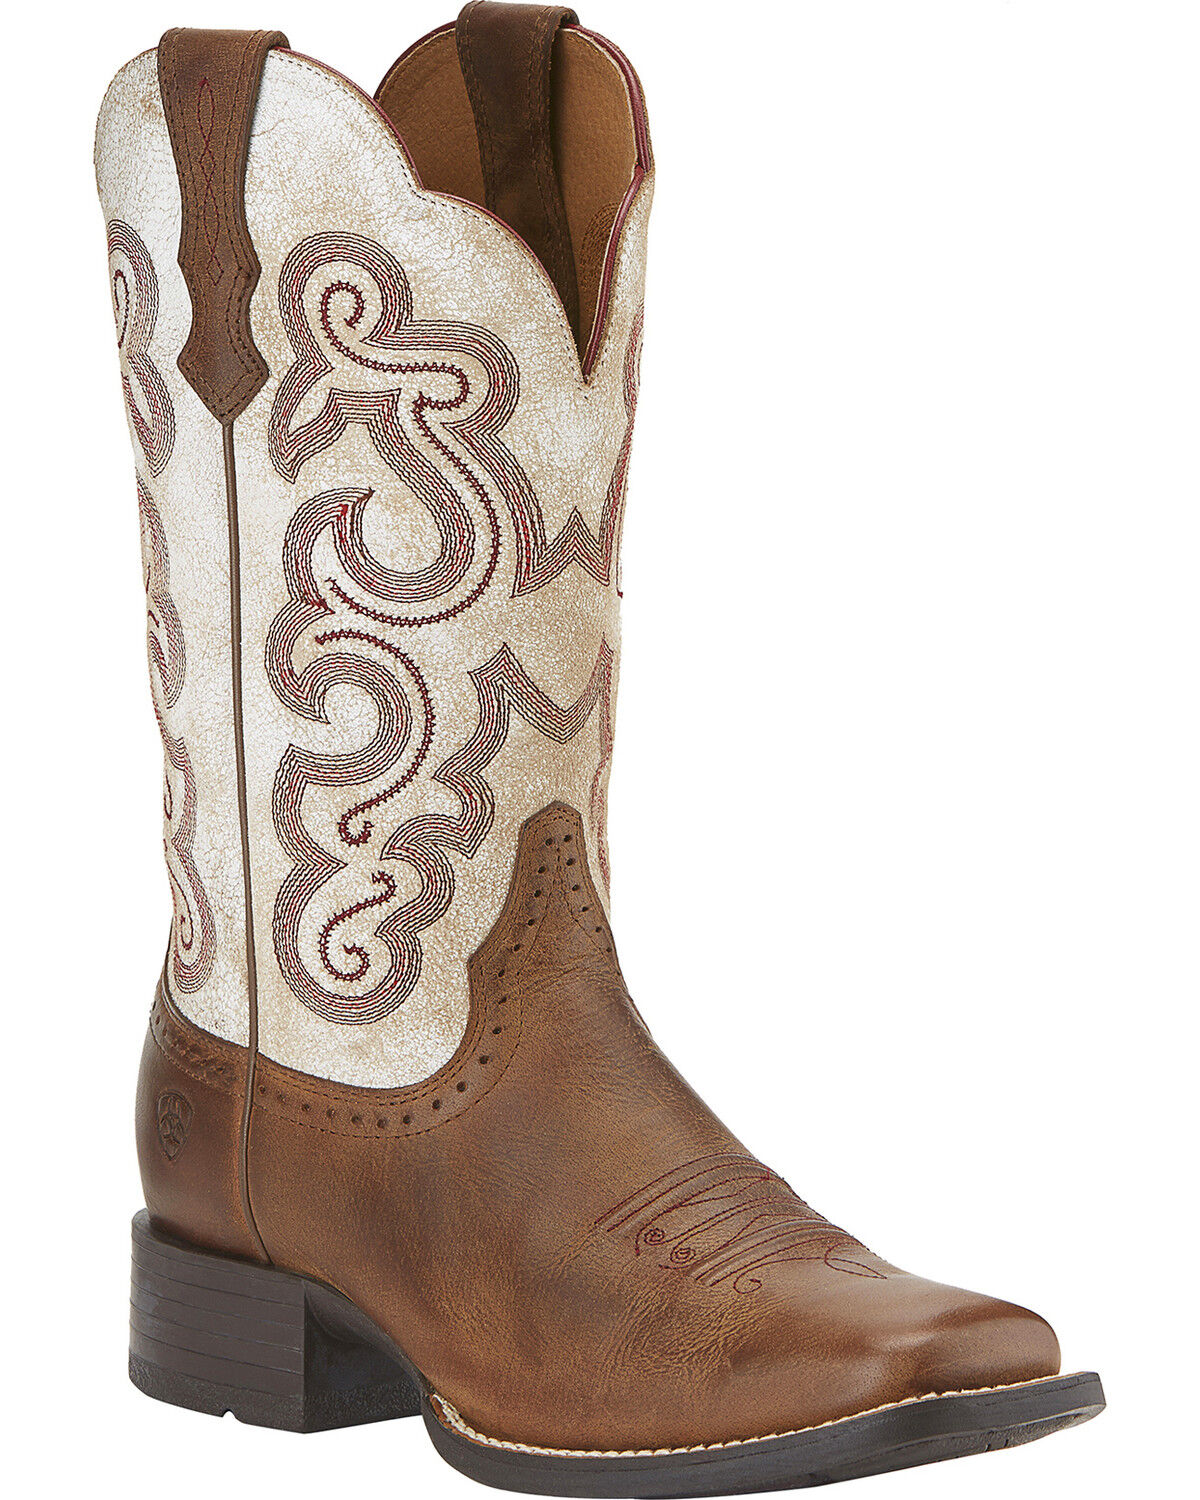 Women's Wide Square Toe Boots - Boot Barn